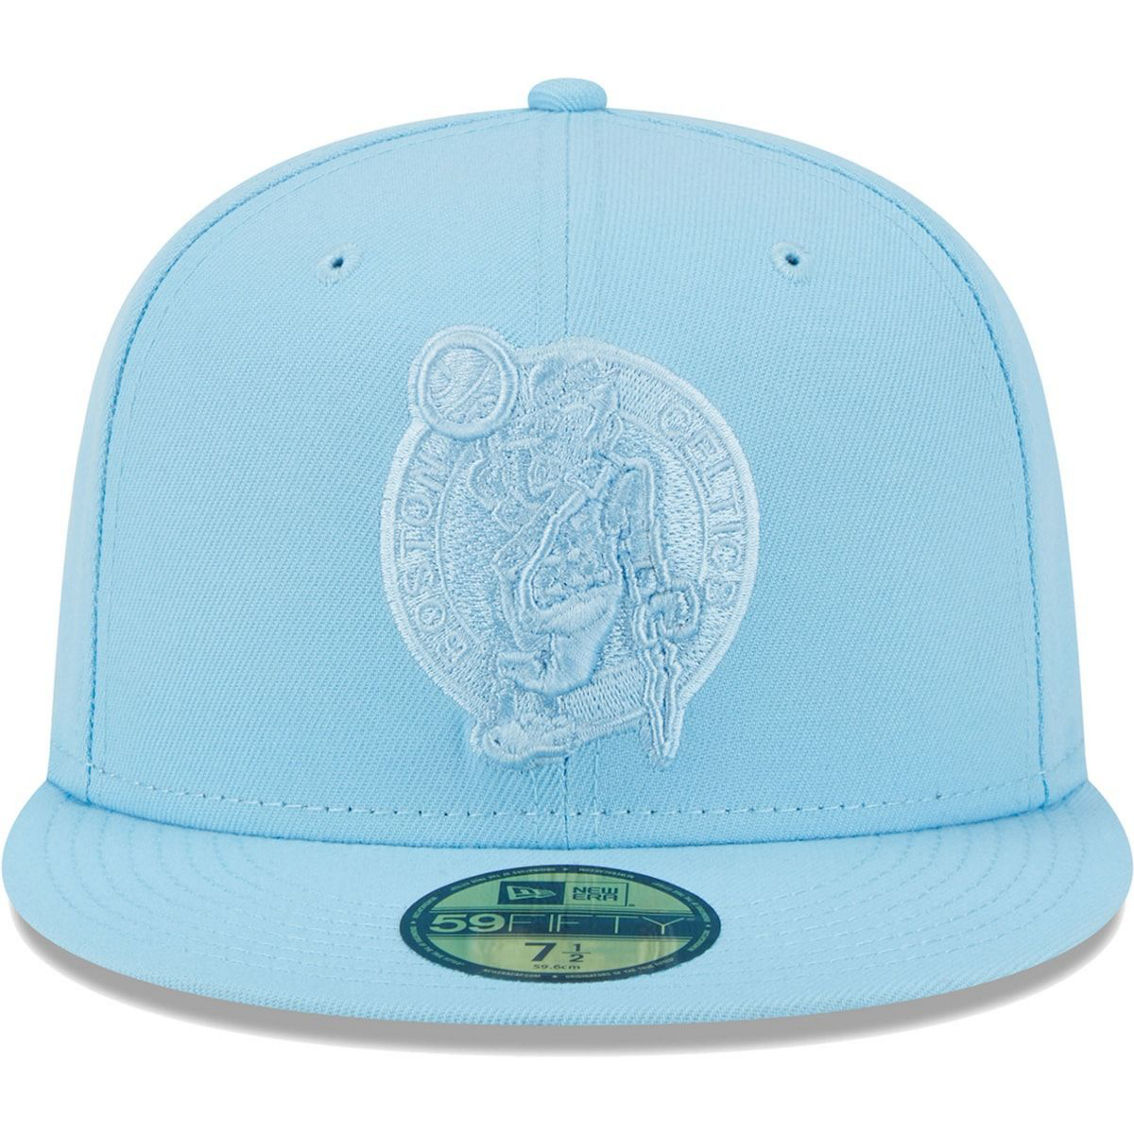 New Era Men's Powder Blue Boston Celtics Spring Color Pack 59FIFTY Fitted Hat - Image 3 of 4